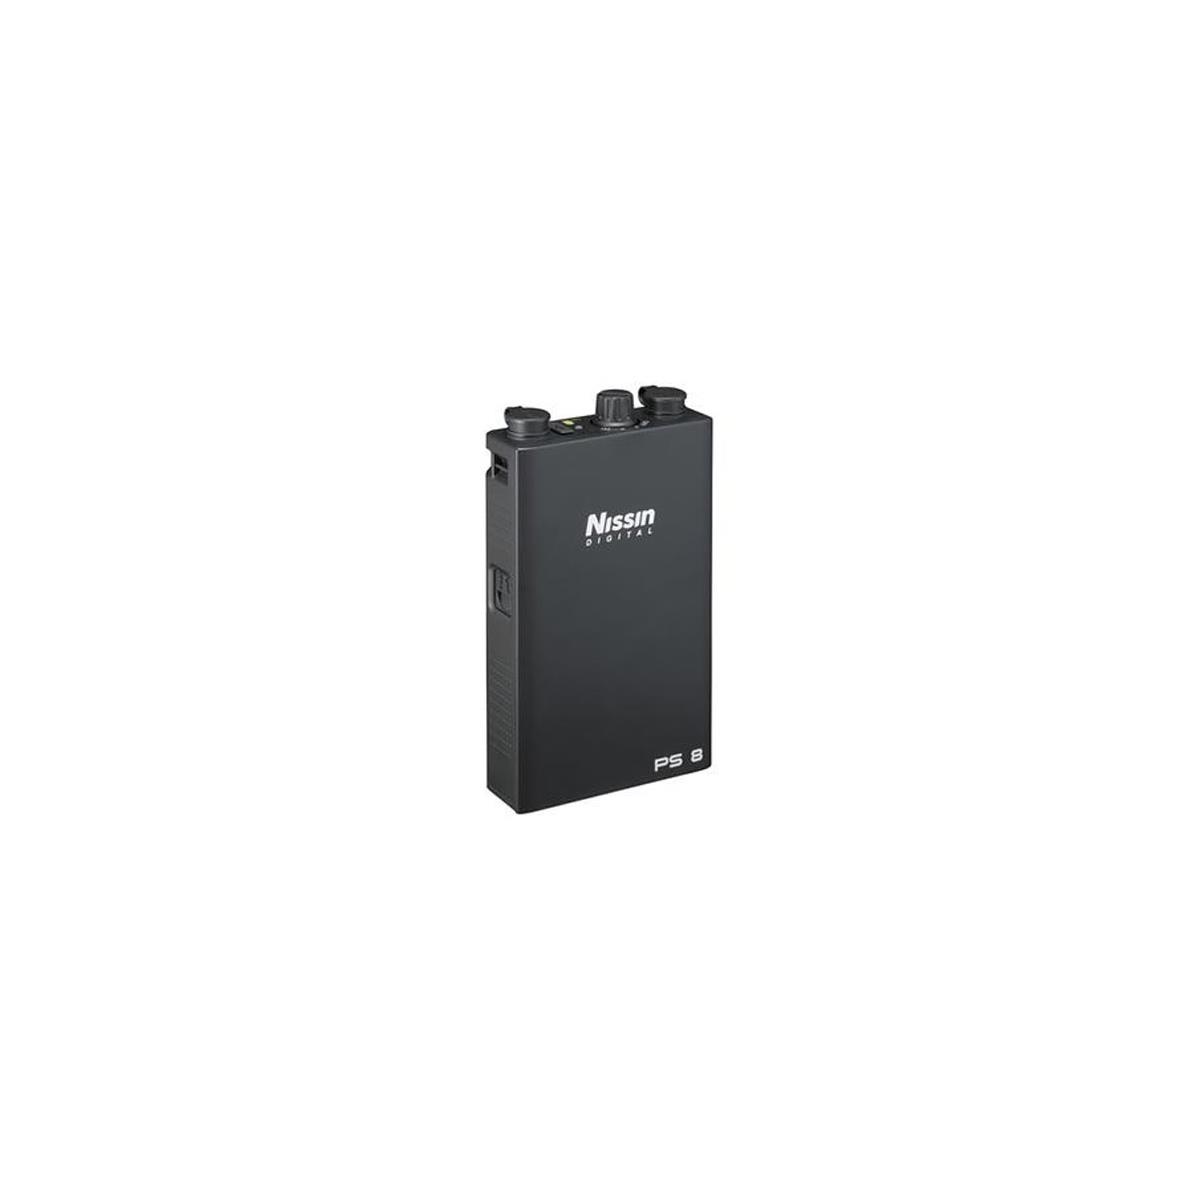 Nissin PS 8 Power Pack - Canon